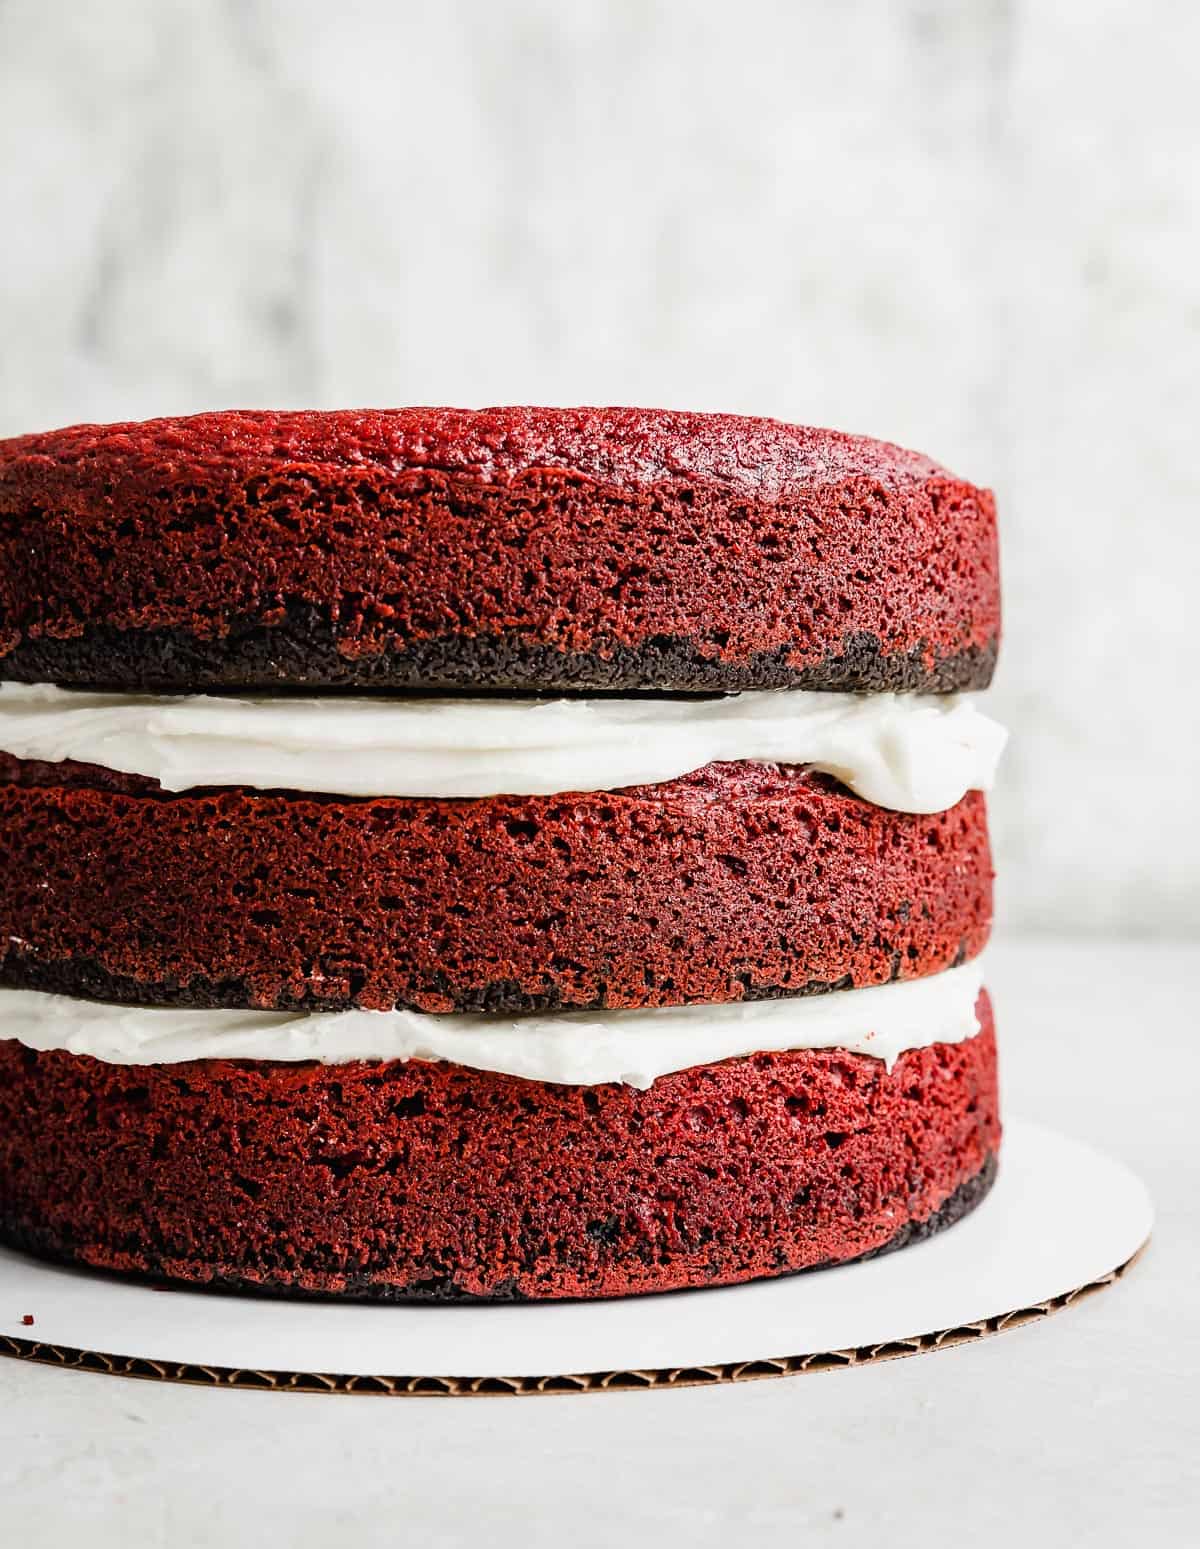 A three tier oreo red velvet cake with cream cheese frosting between each layer.